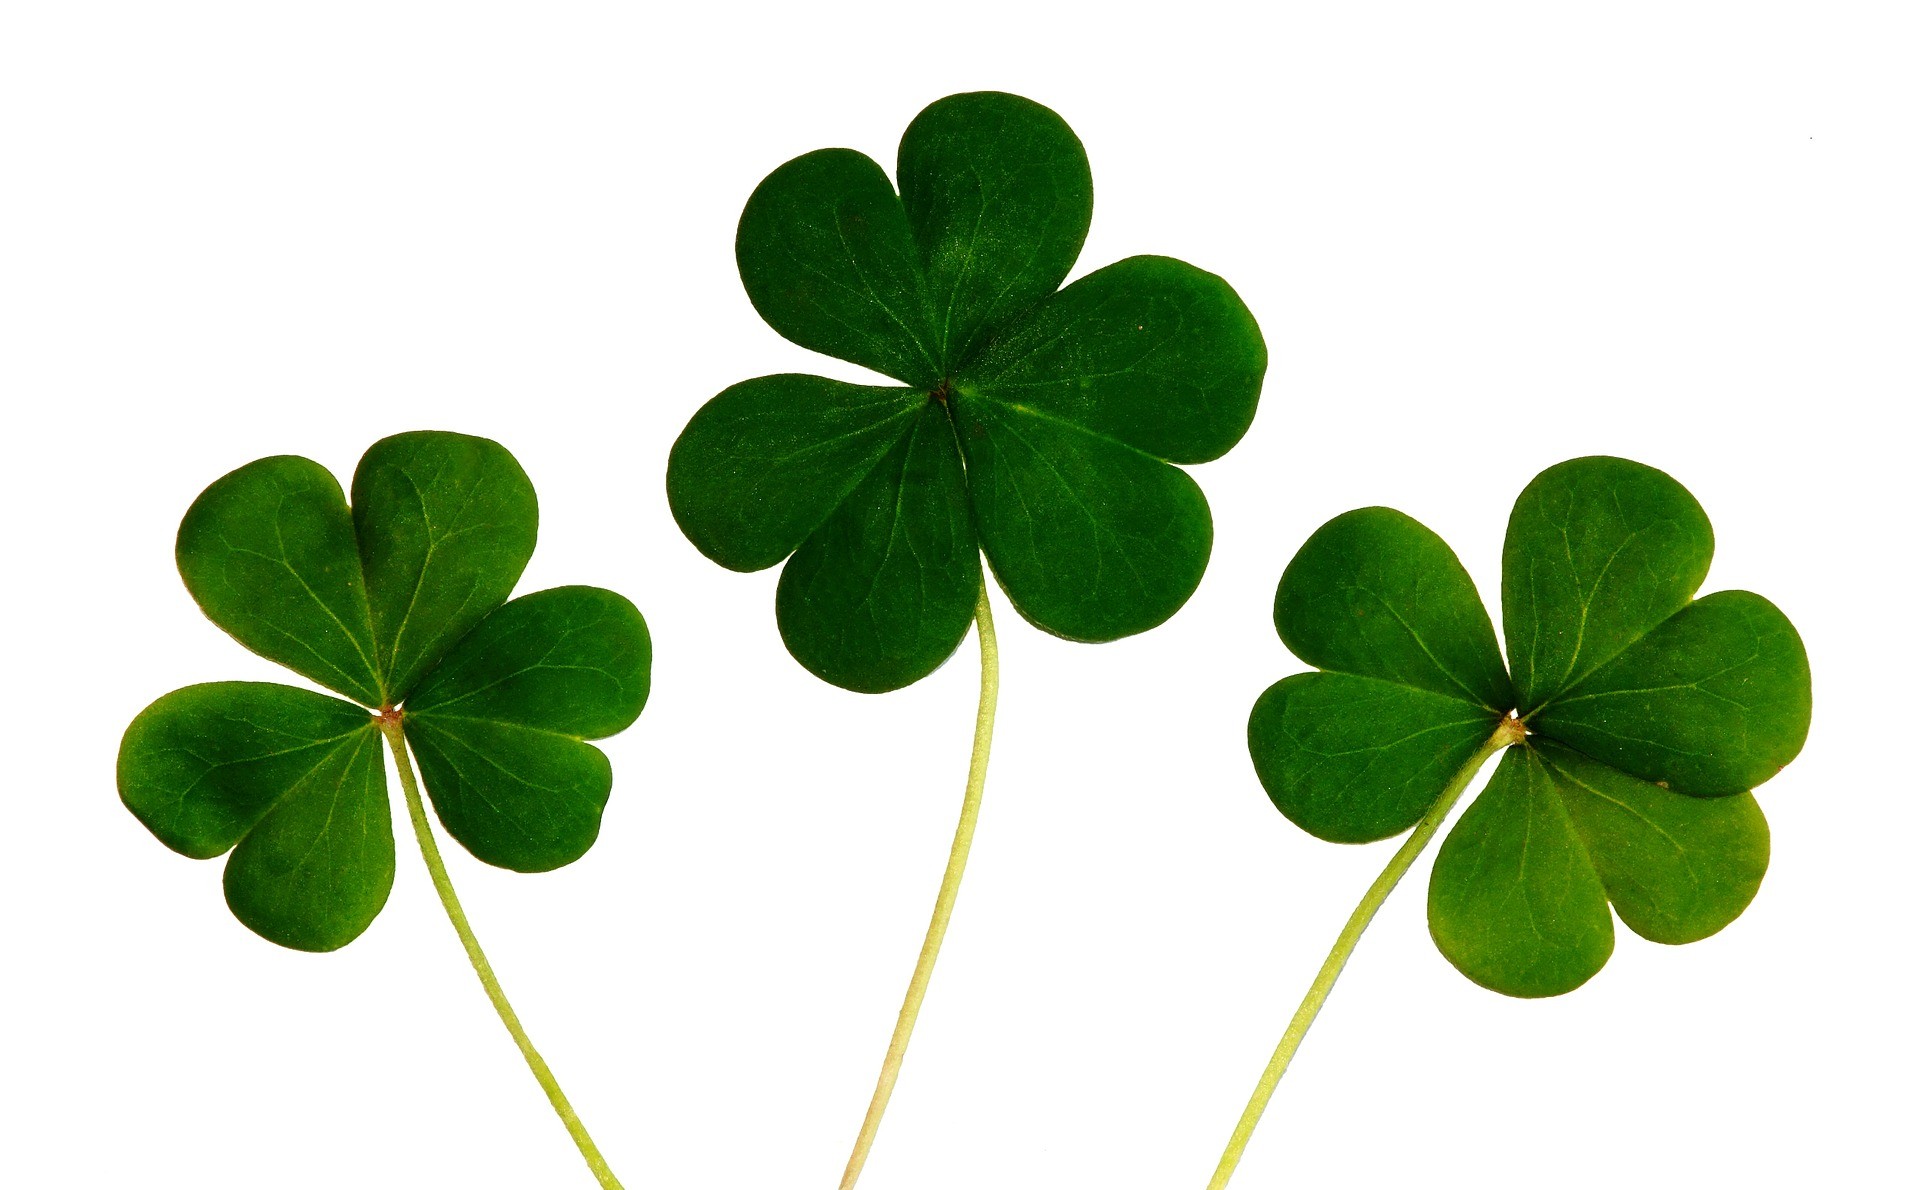 Why are four-leaf clovers lucky and what should you do if you